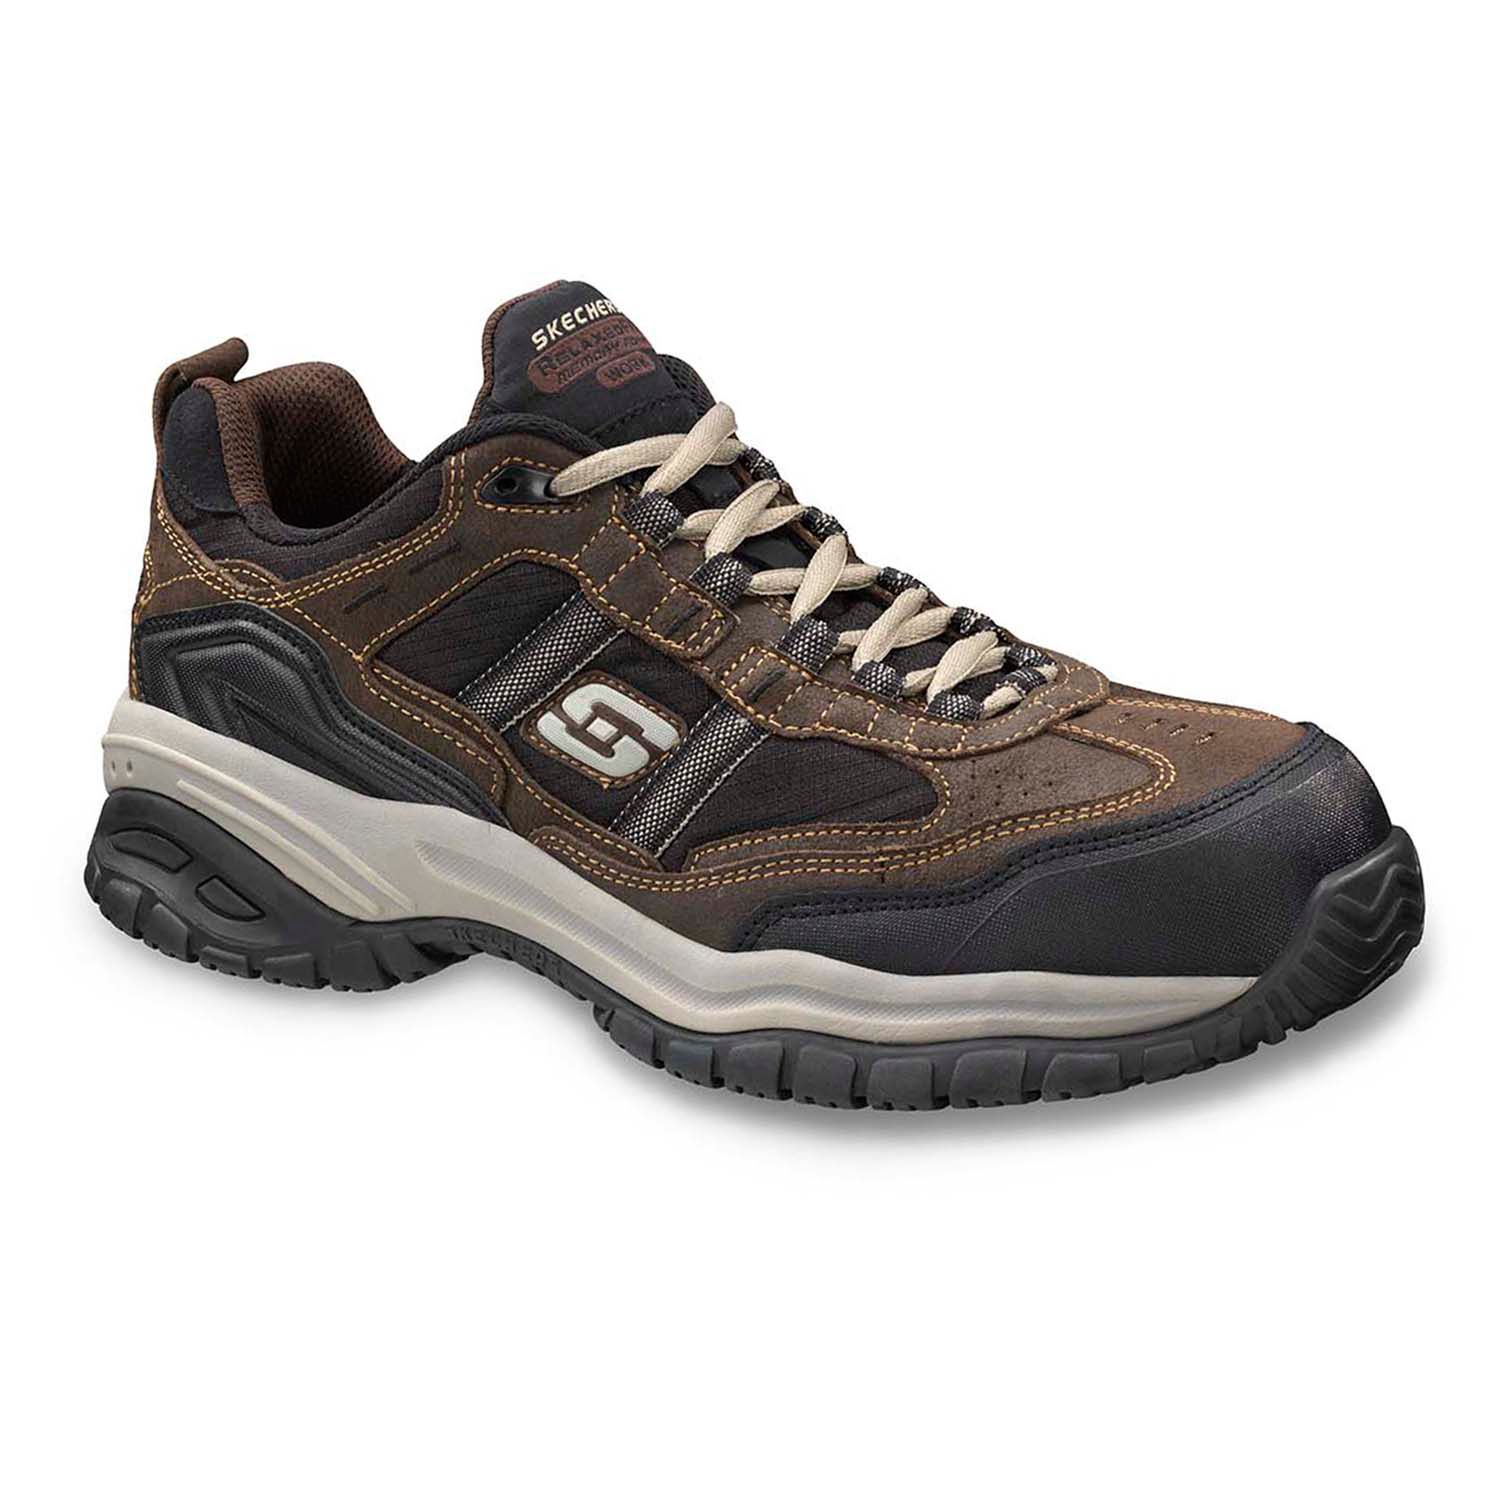 Skechers Grinnel Relaxed Fit Men's Work 